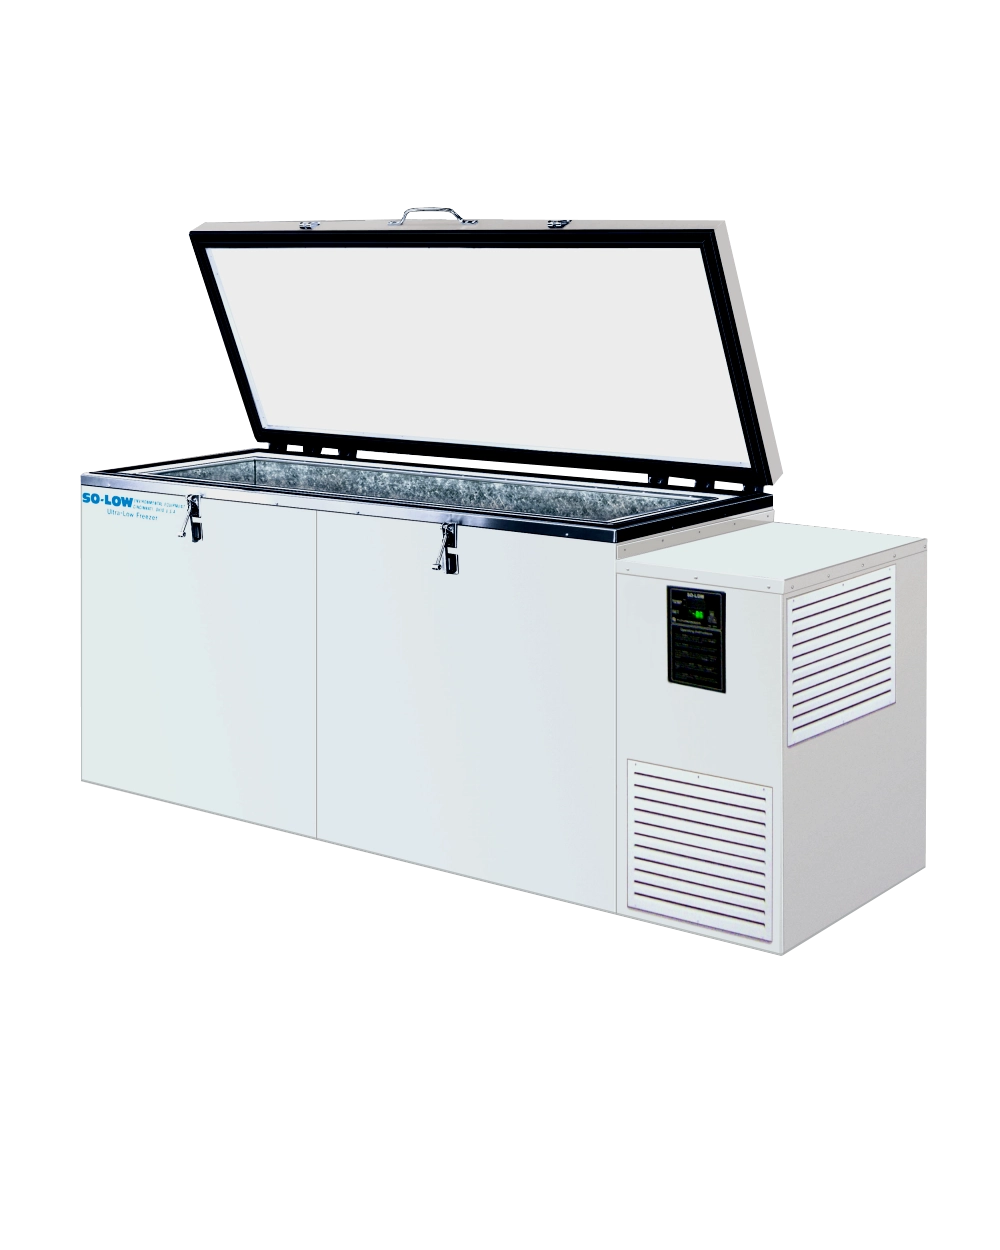 So-Low C80-27 Ultra Low Temperature -80C Chest Freezer 27 cu. ft. 115V/208V/230V (ships in 3-4 weeks ARO)